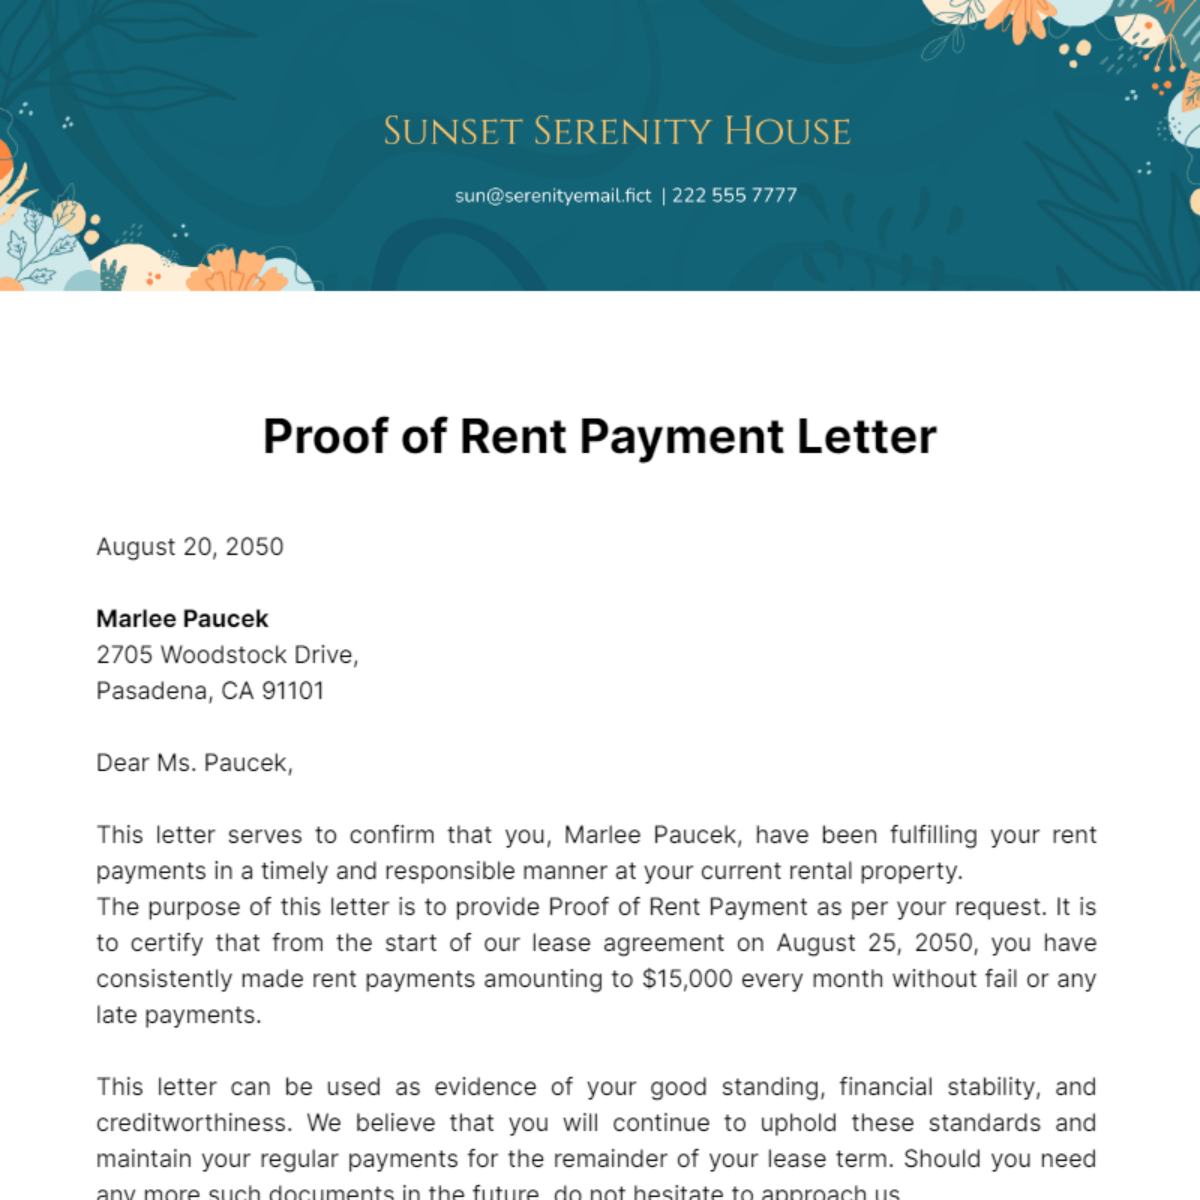 Proof of Rent Payment Letter Template